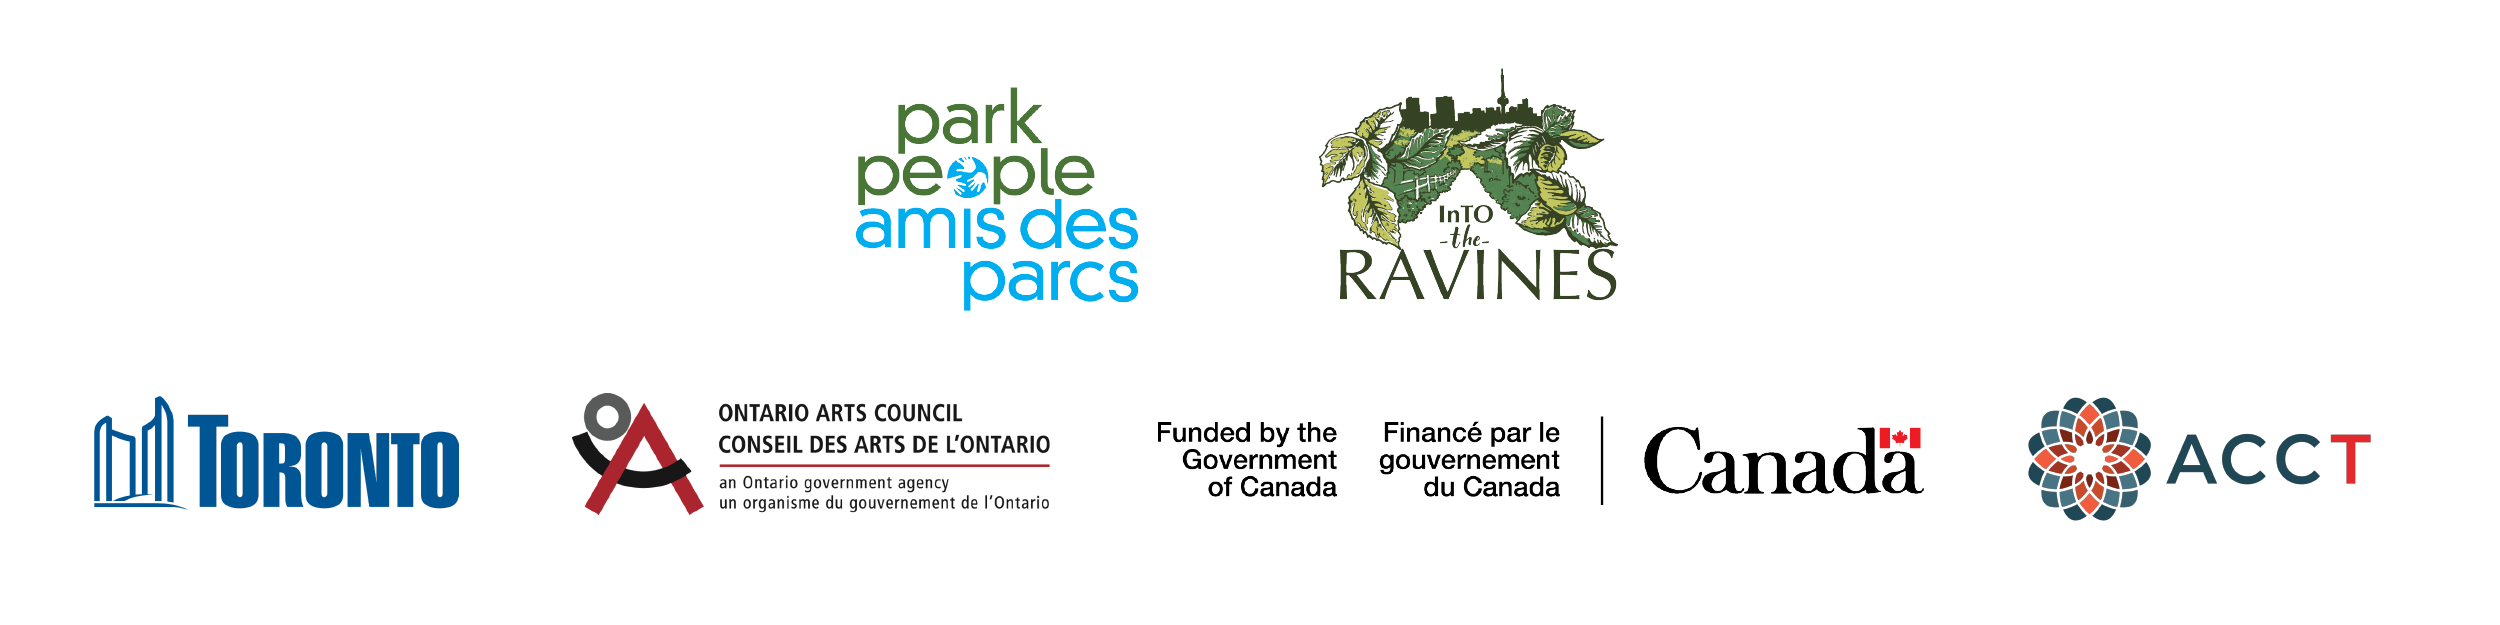 Logos for Park People, InTO the Ravines, City of Toronto, Ontario Arts Council and the Government of Canada